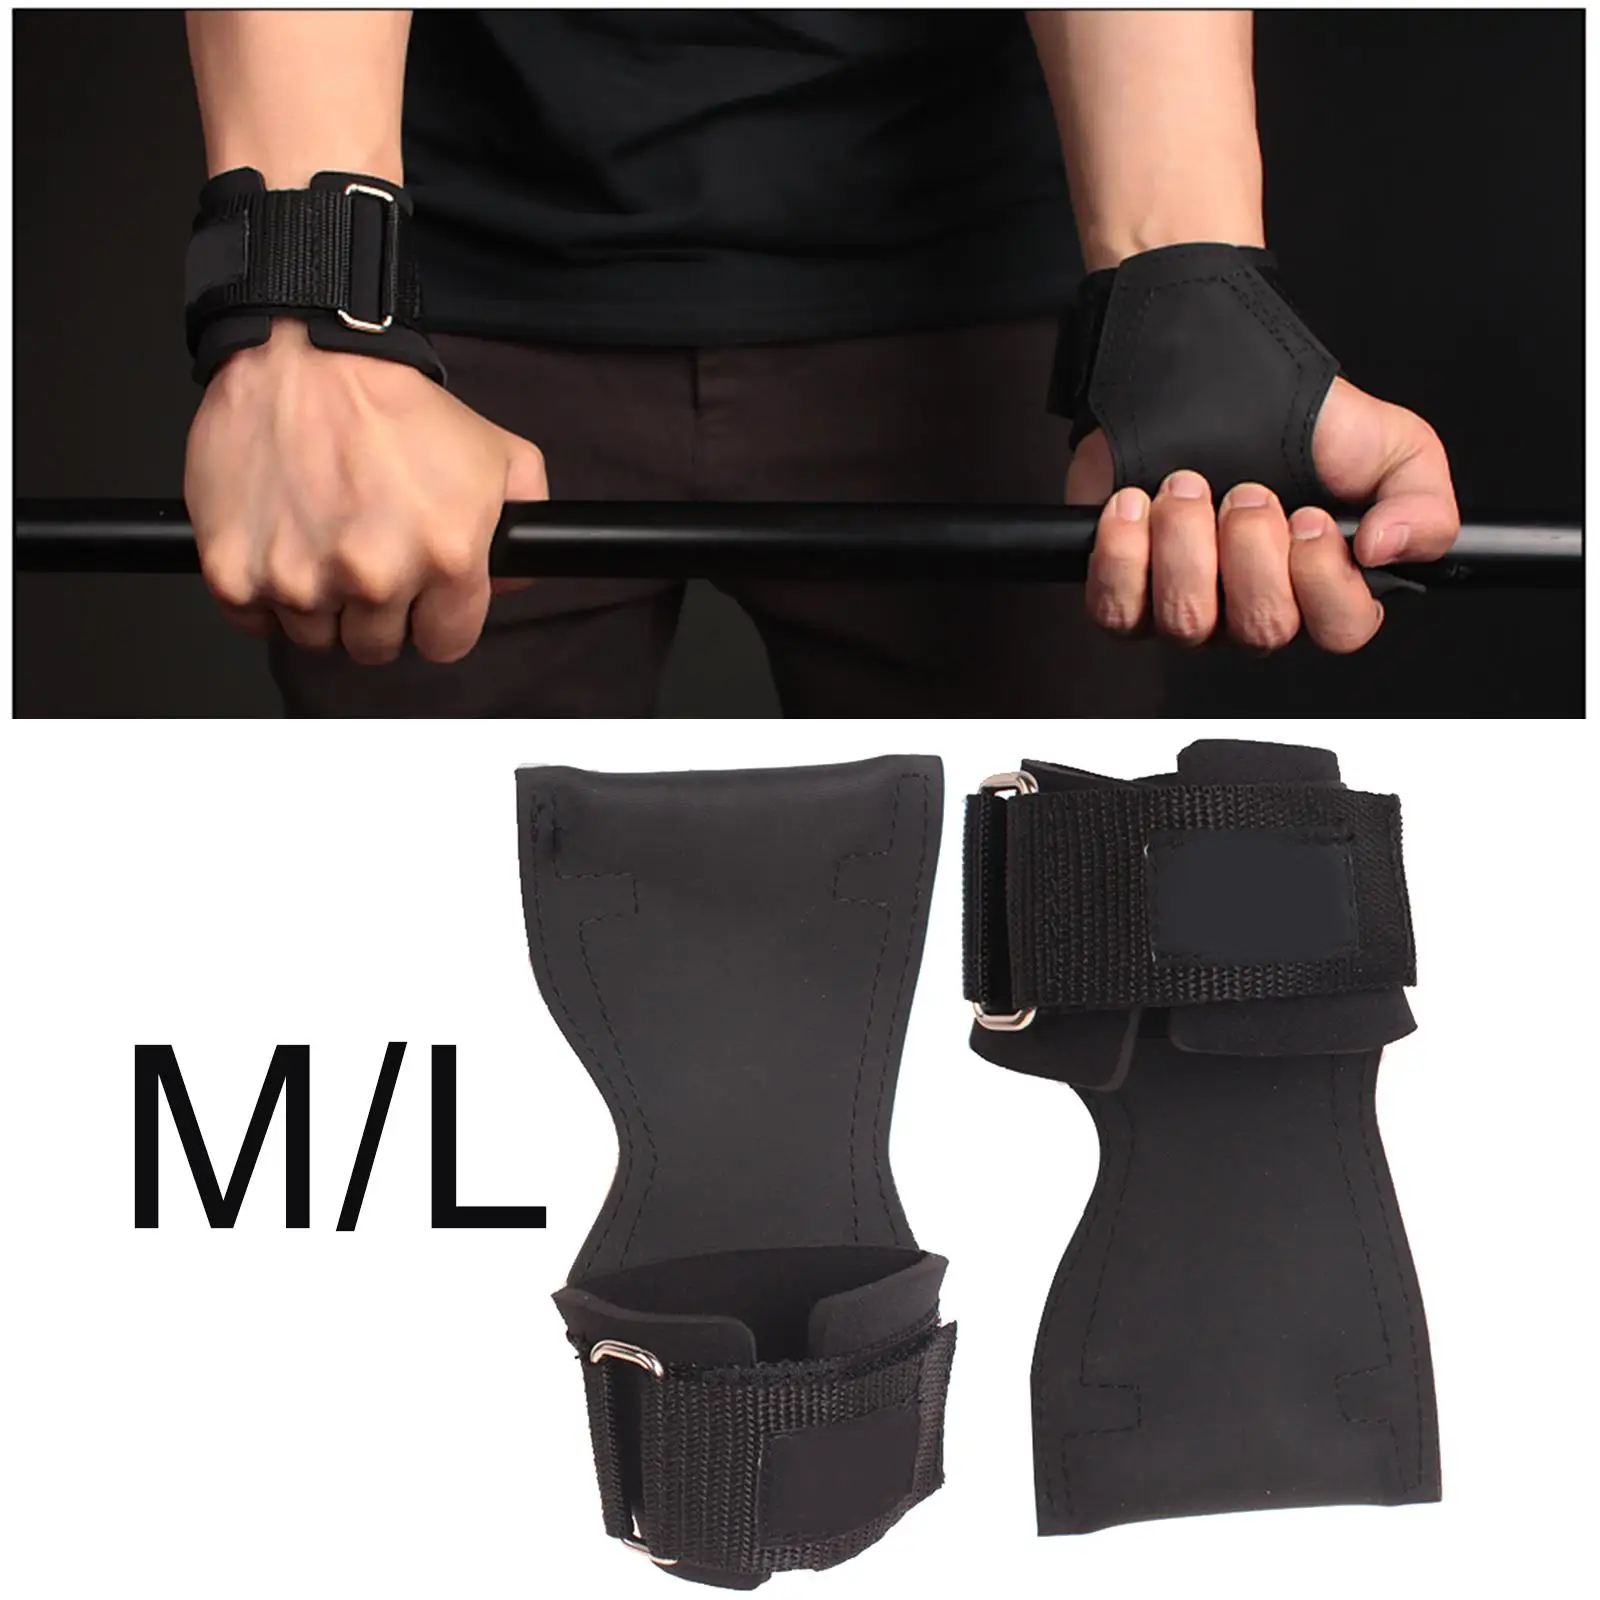 Gym Workout Gloves Palm Grip Anti Skid Hand Grip Weight Lifting Deadlifts Wrist Wraps Support Palm Protection